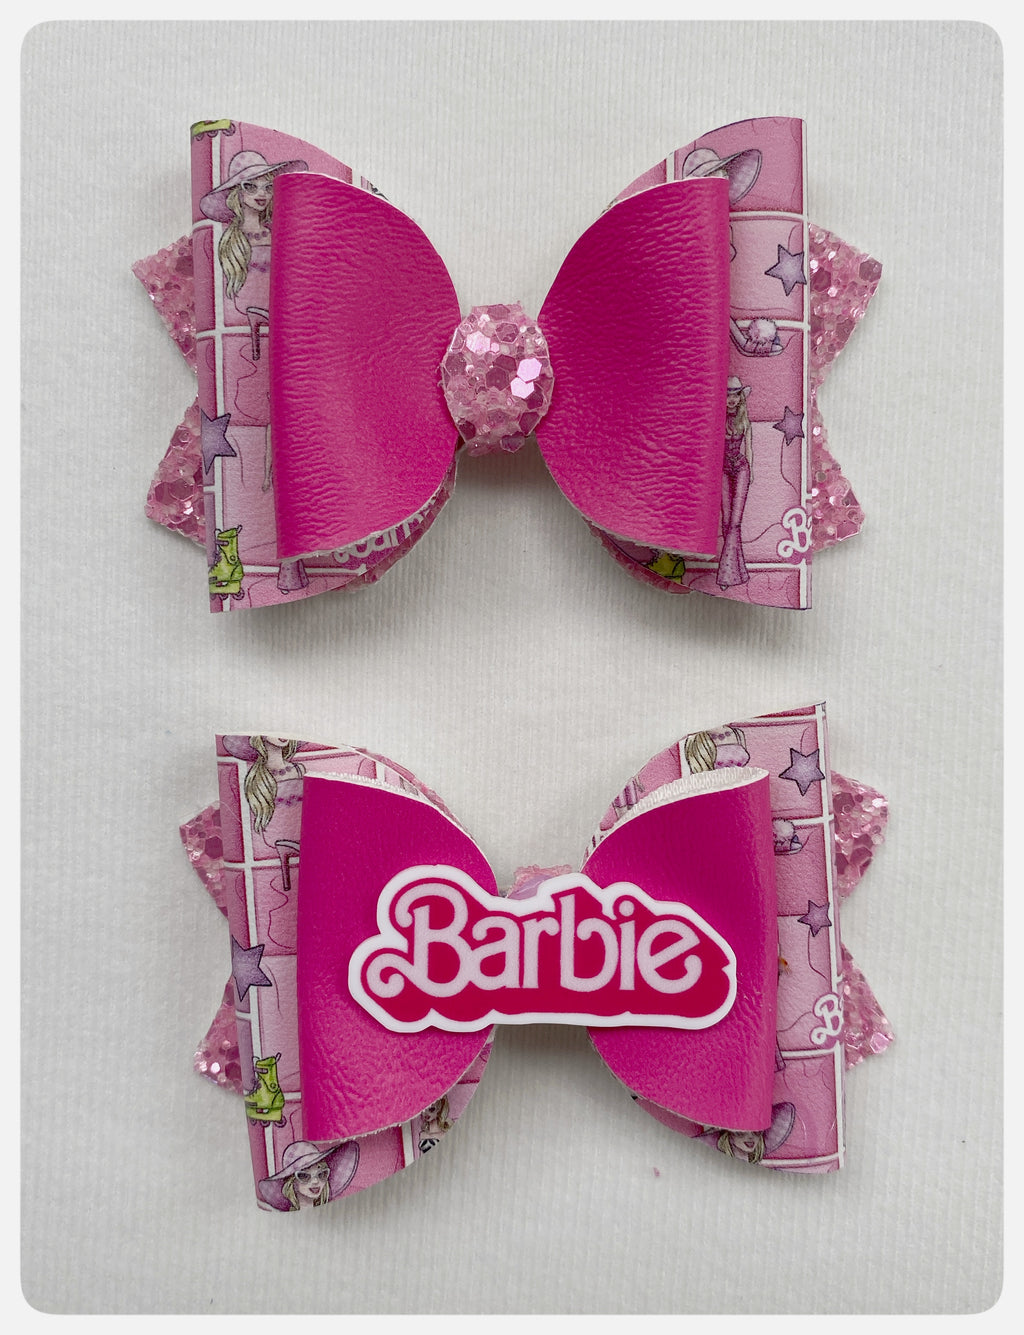 Barbie Pigtail and Cheer bow